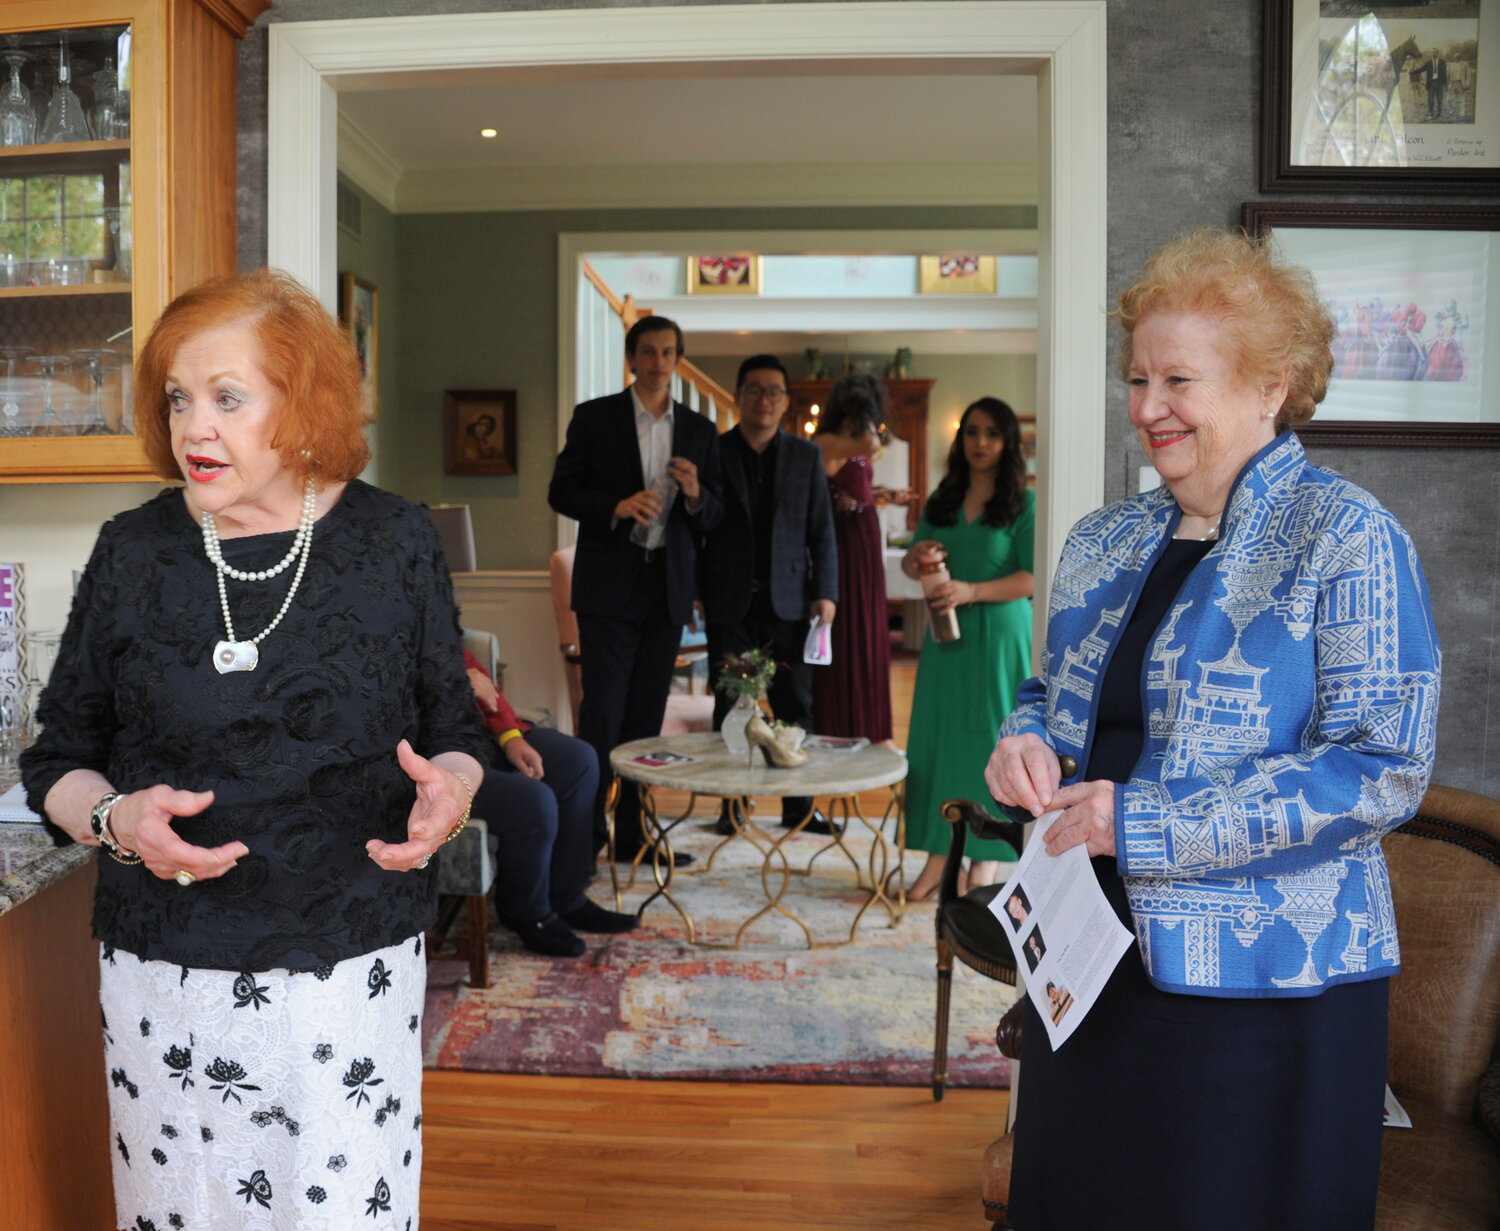 Barbara Donnelly Bentivoglio, left, welcomes Academy of Vocal Arts patrons and artists to her home in Solebury.